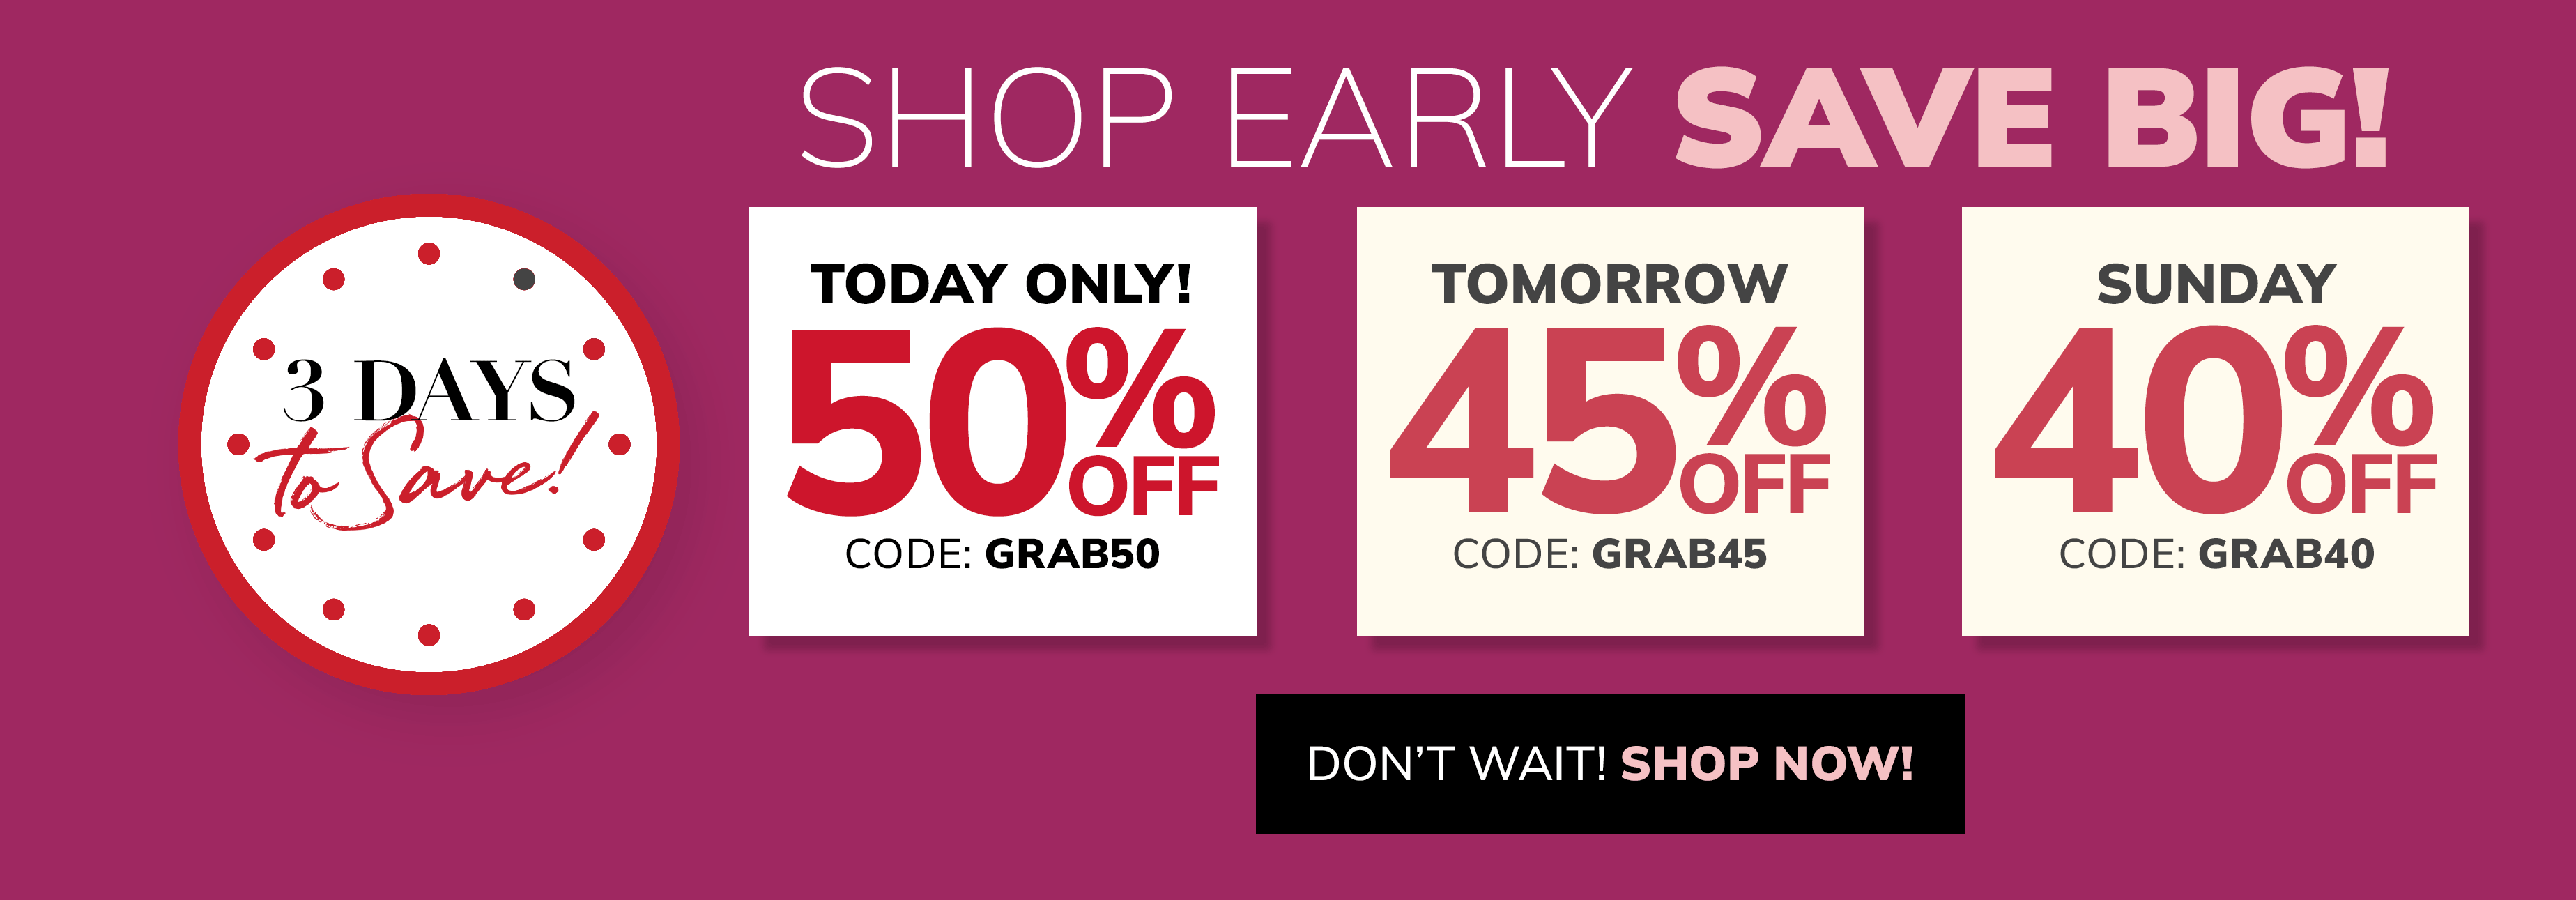 BEAT THE CLOCK! 50% OFF WITH CODE: GRAB50